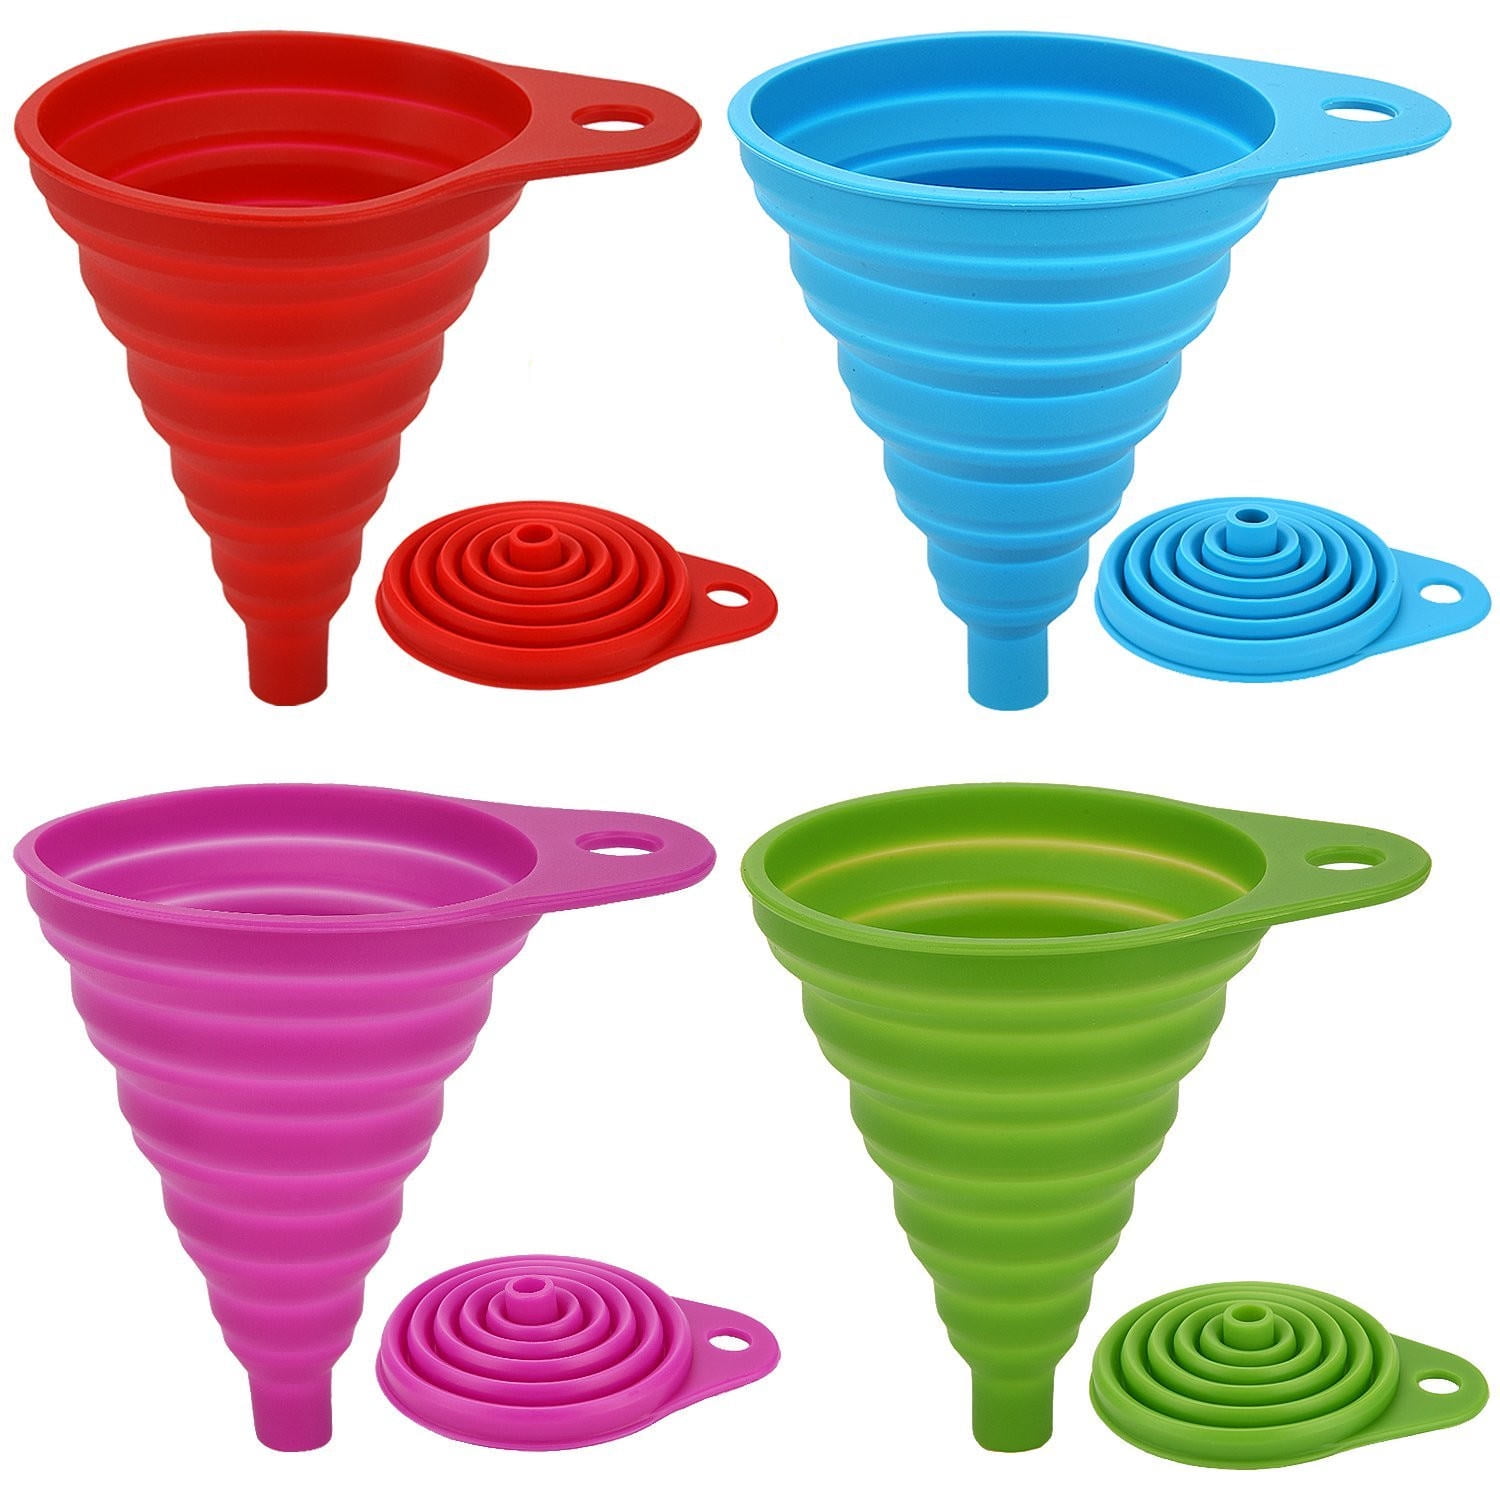 New Flexible Silicone Kitchen Oil Collapsible Funnel Pack of 3 